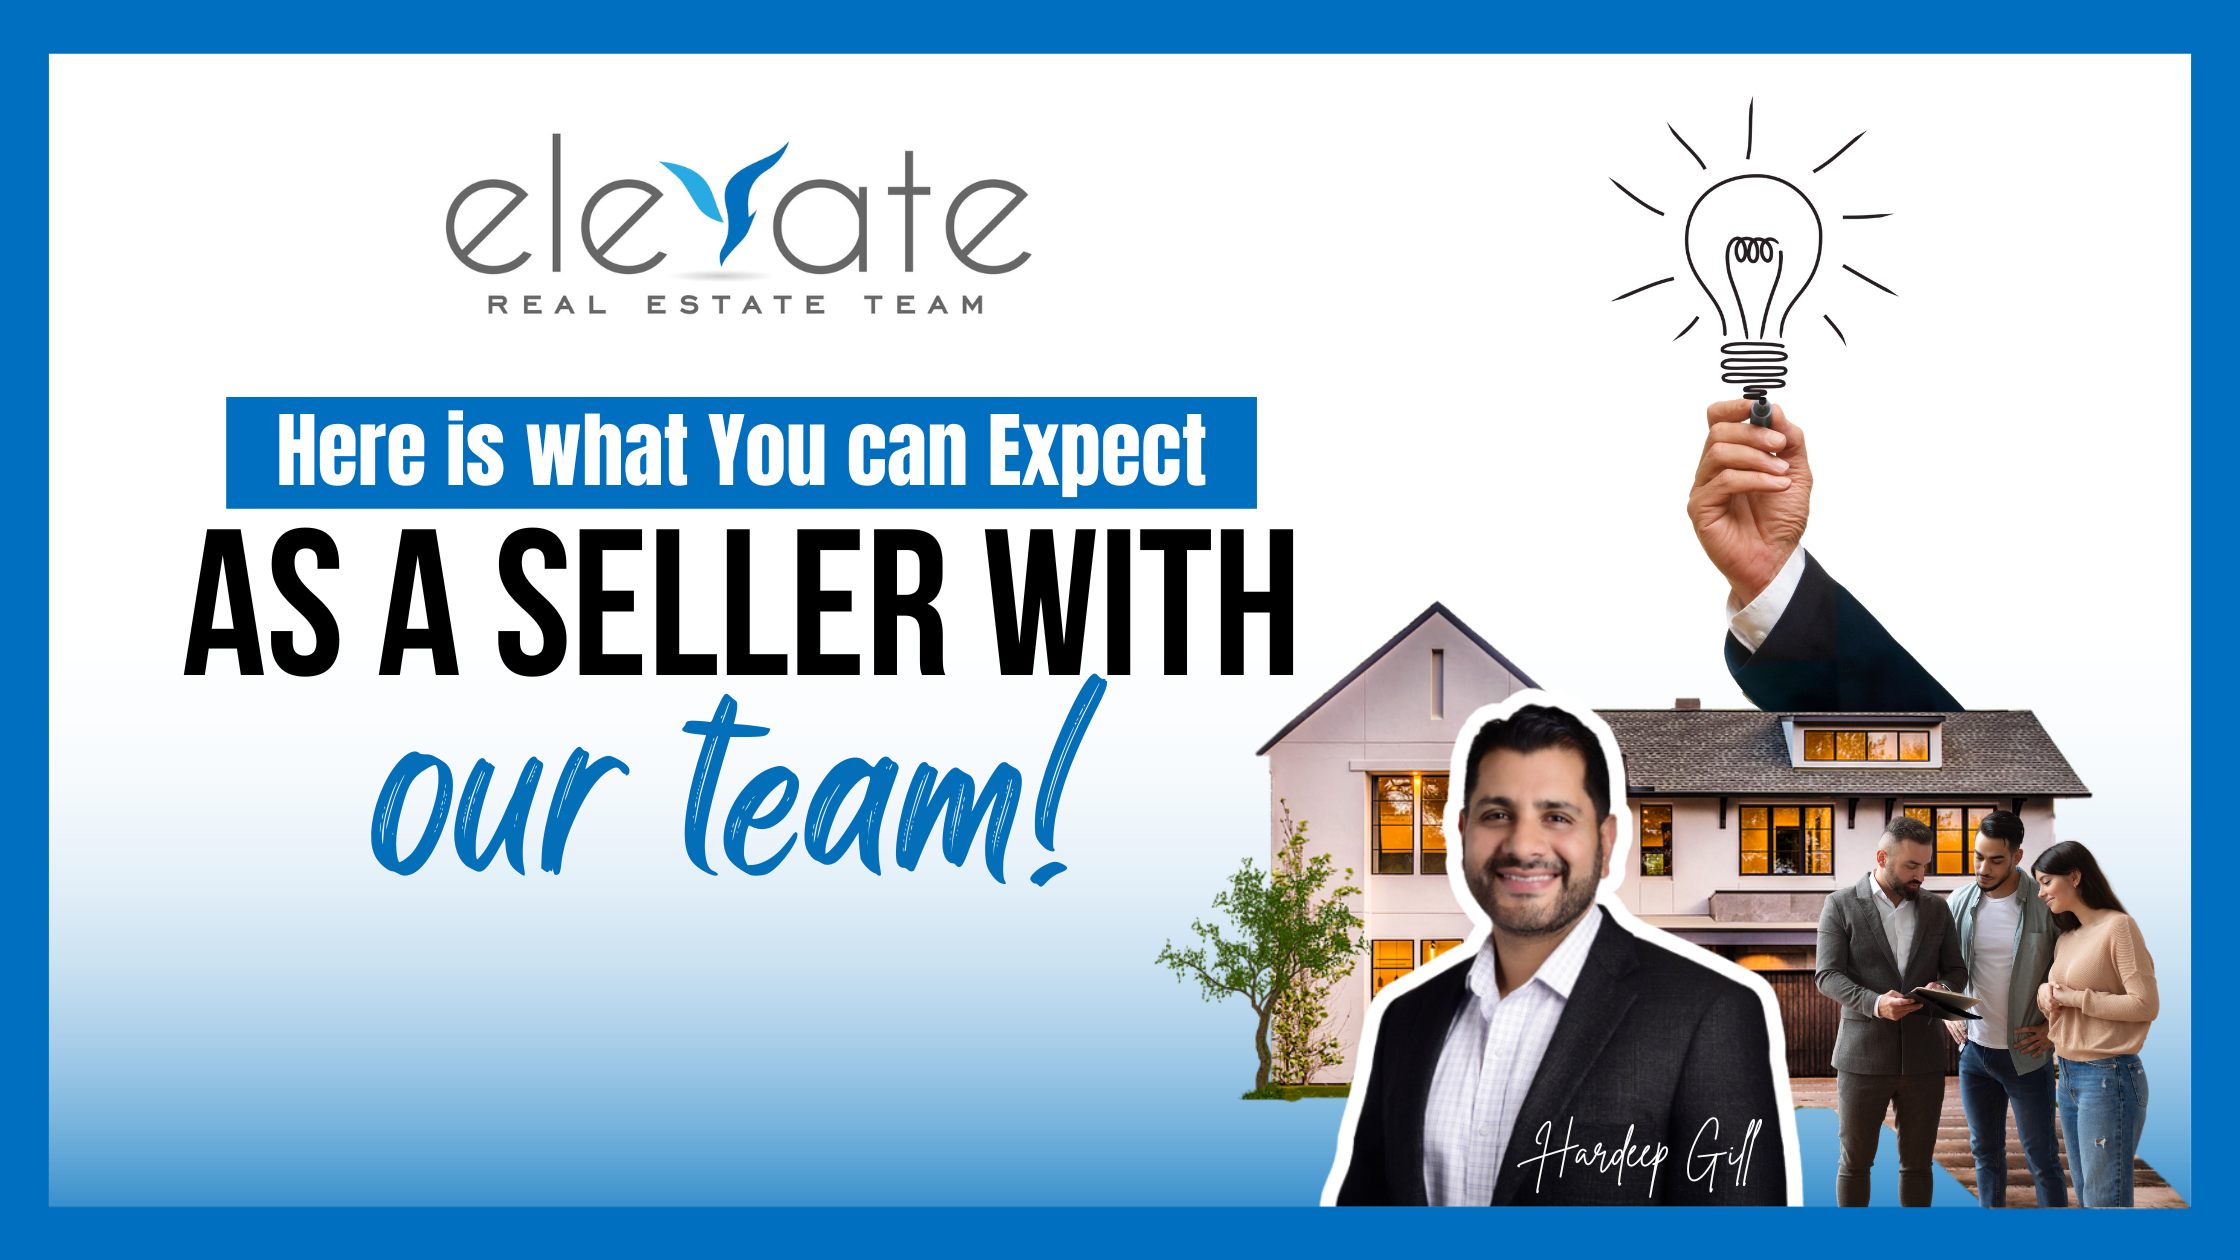 Here is what You can Expect as a seller with our team